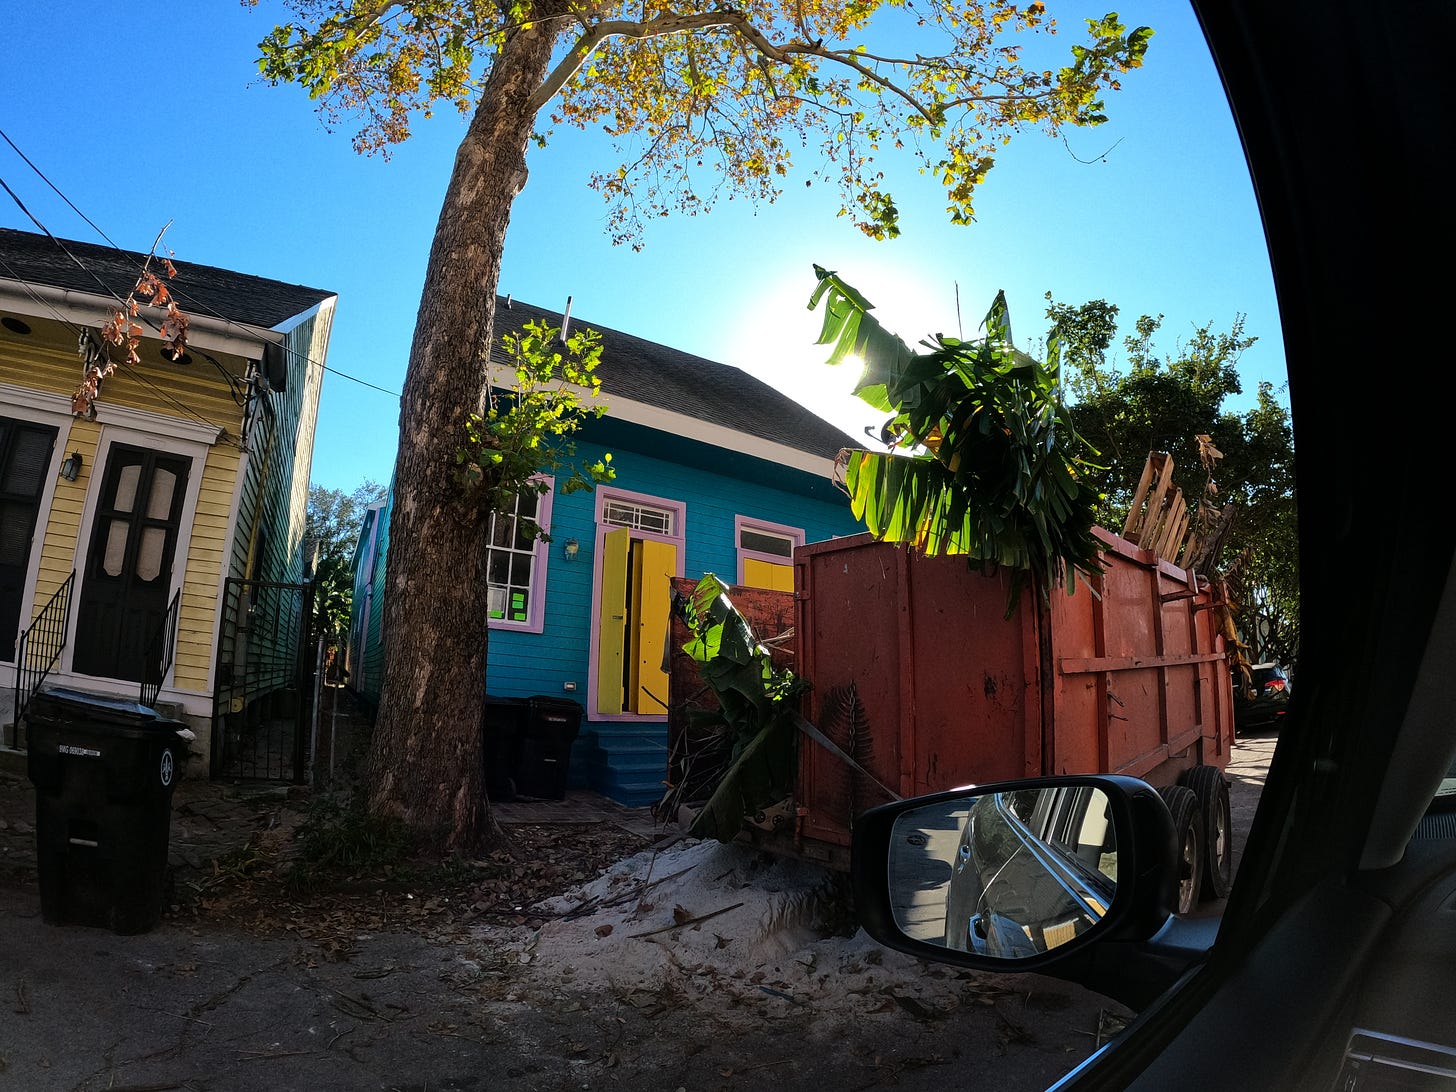 the sun is shining on a colorful blue house with yellow windows as bananna tree stretches out over a dumpster - this is classic shot of Bywater neighborhood in new orleans